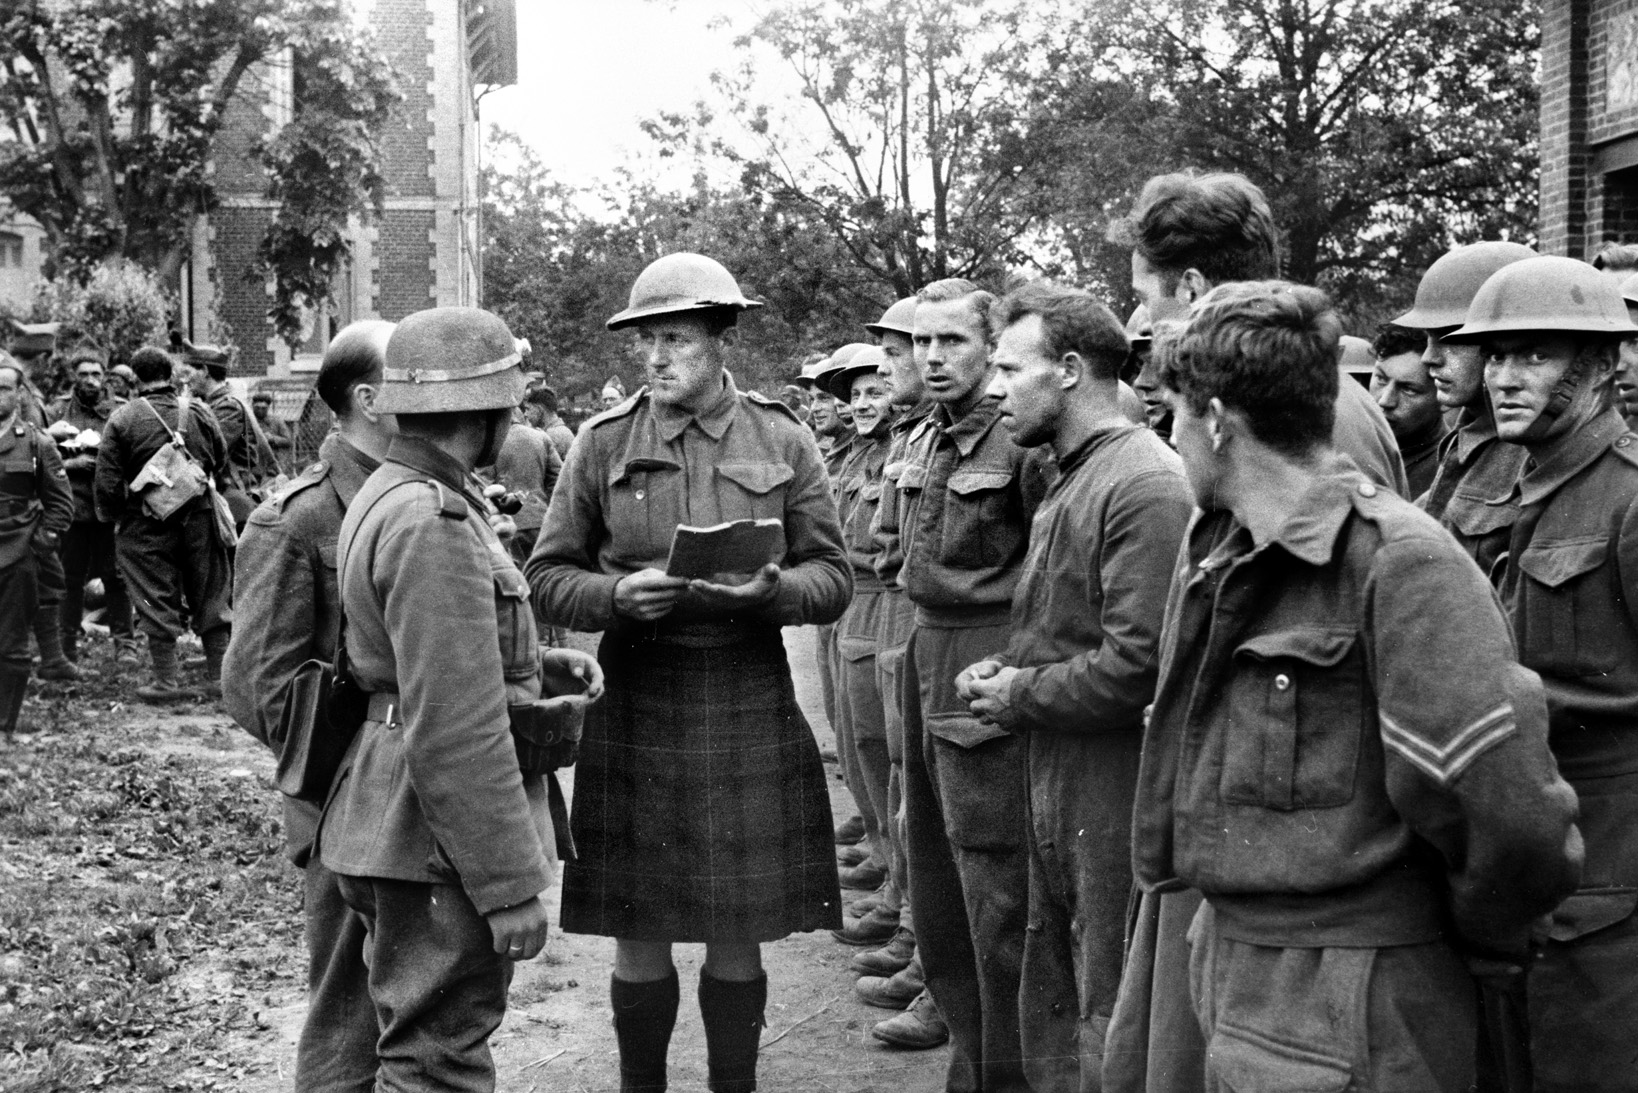 "For you the war is over" Highland troops of the 51st Division line up to accept their fate as prisoners of war.